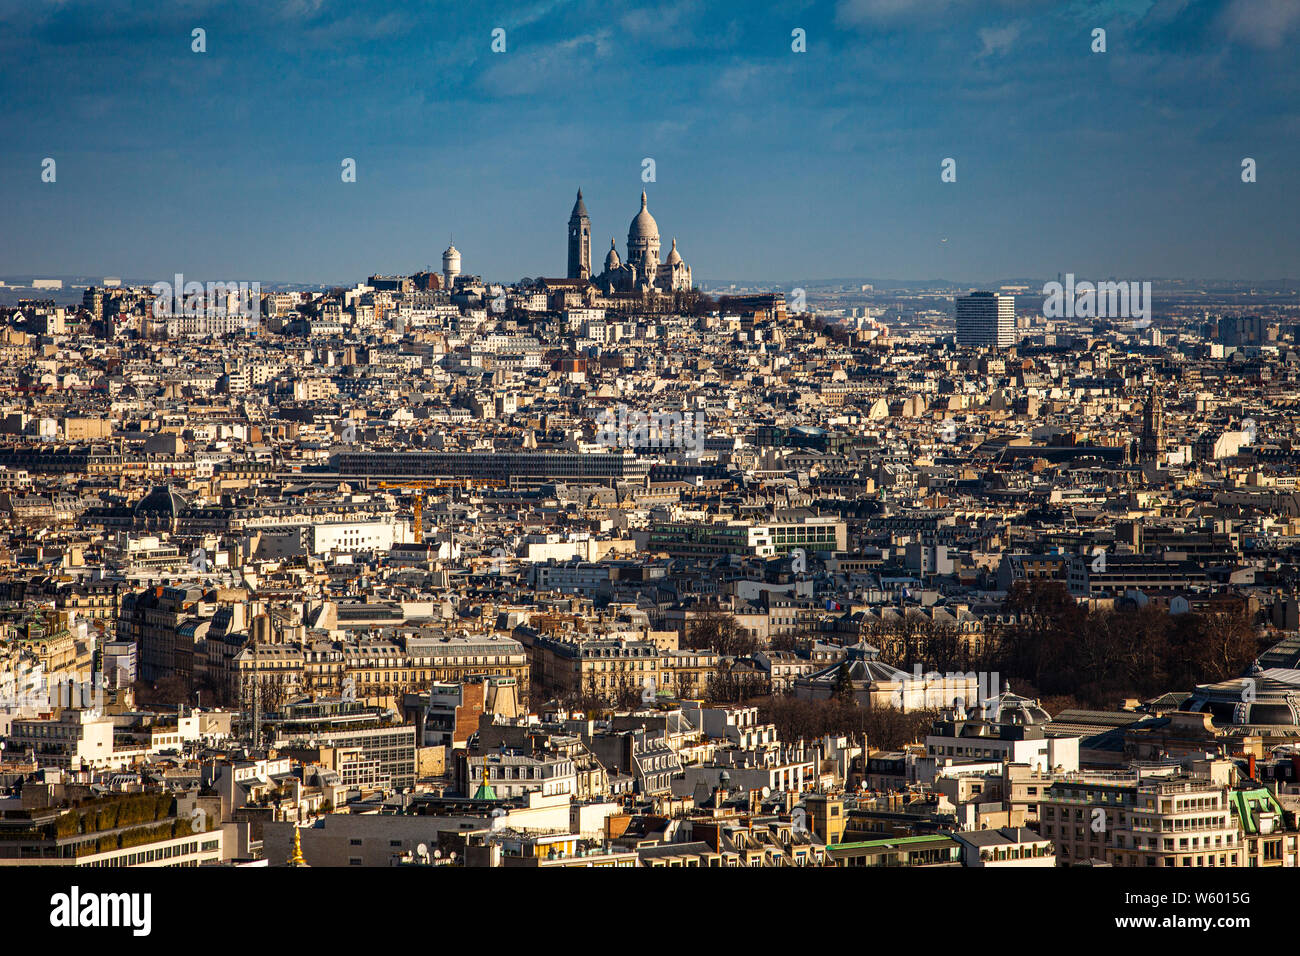 Sacre Coer de Montmartre seen from the Top of the Eiffel Tower Stock Photo